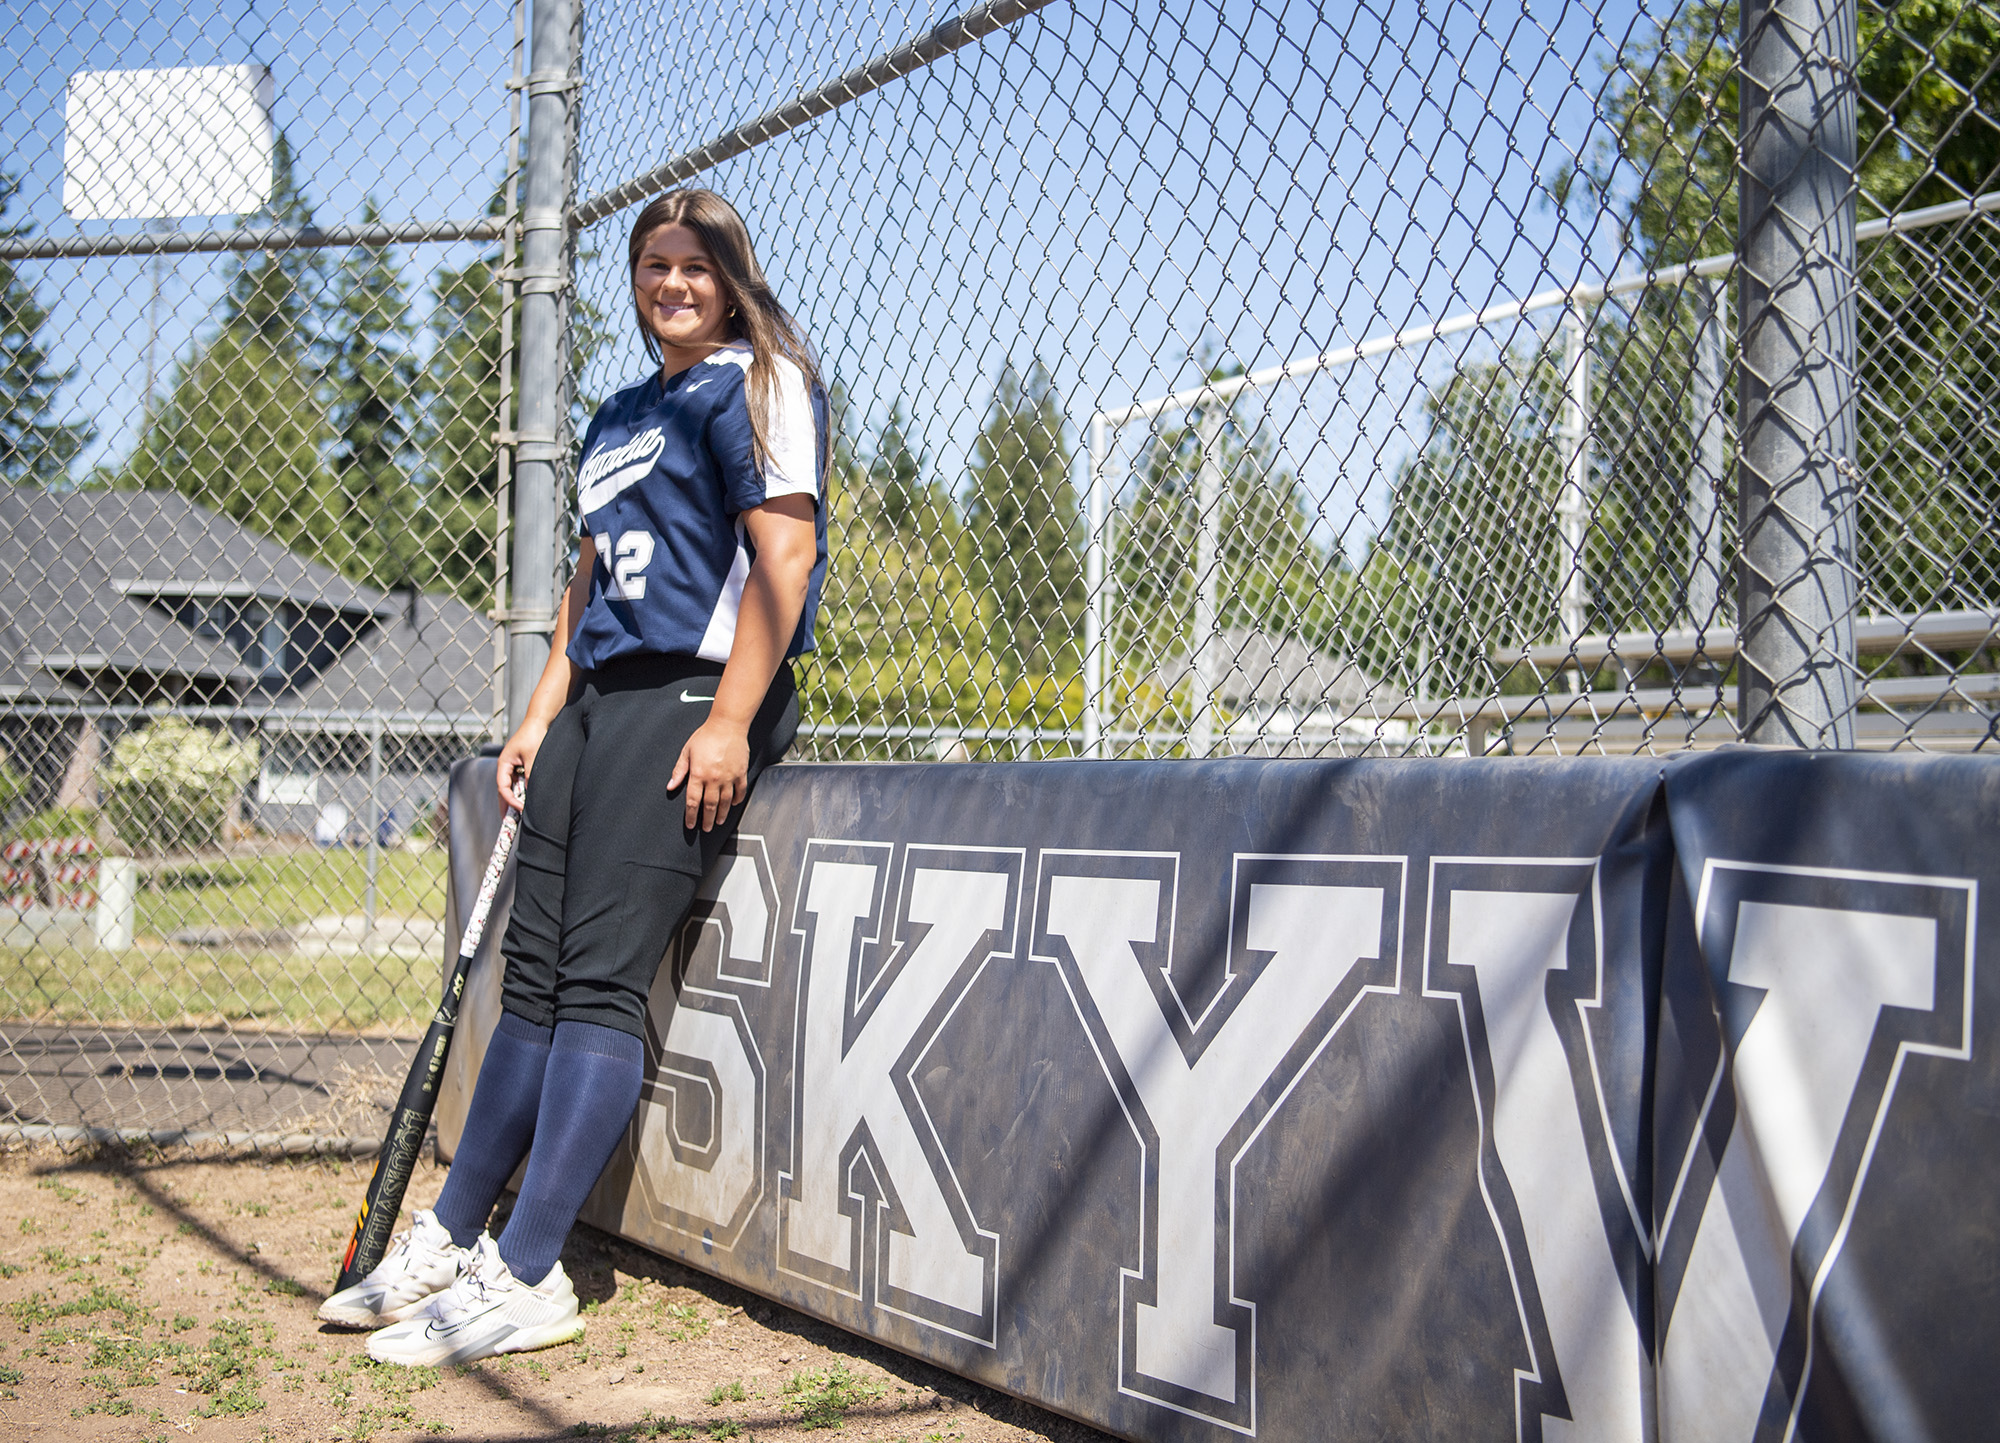 Skyview sophomore Maddie Milhorn stands for a portrait Tuesday, June 6, 2023, at Skyview High School. Milhorn is The Columbian’s All-Region softball player of the year.